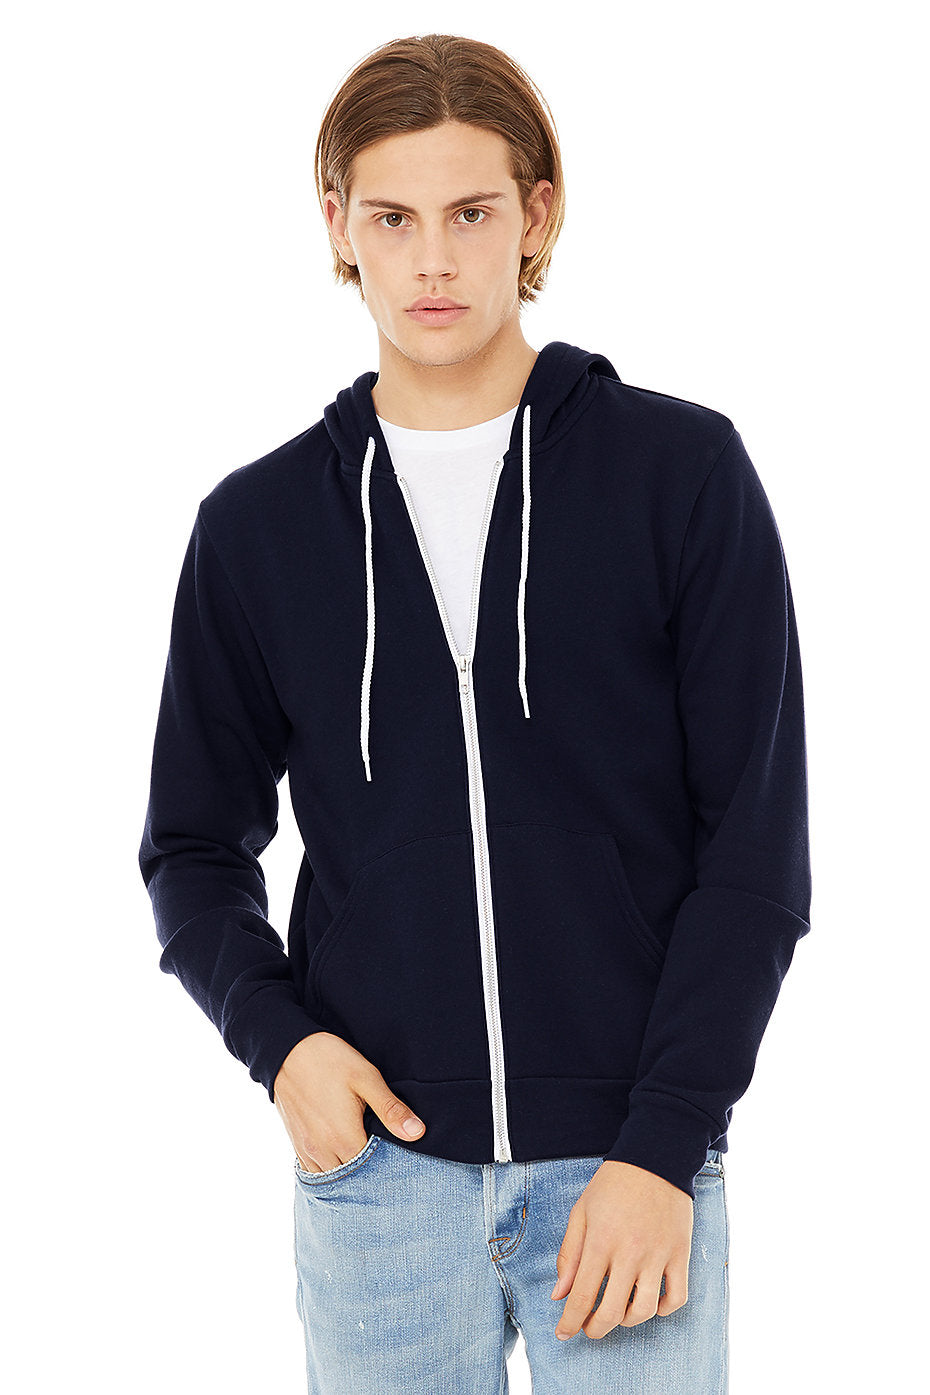 zip hoody with liner feat Polygon Ape YC #6437